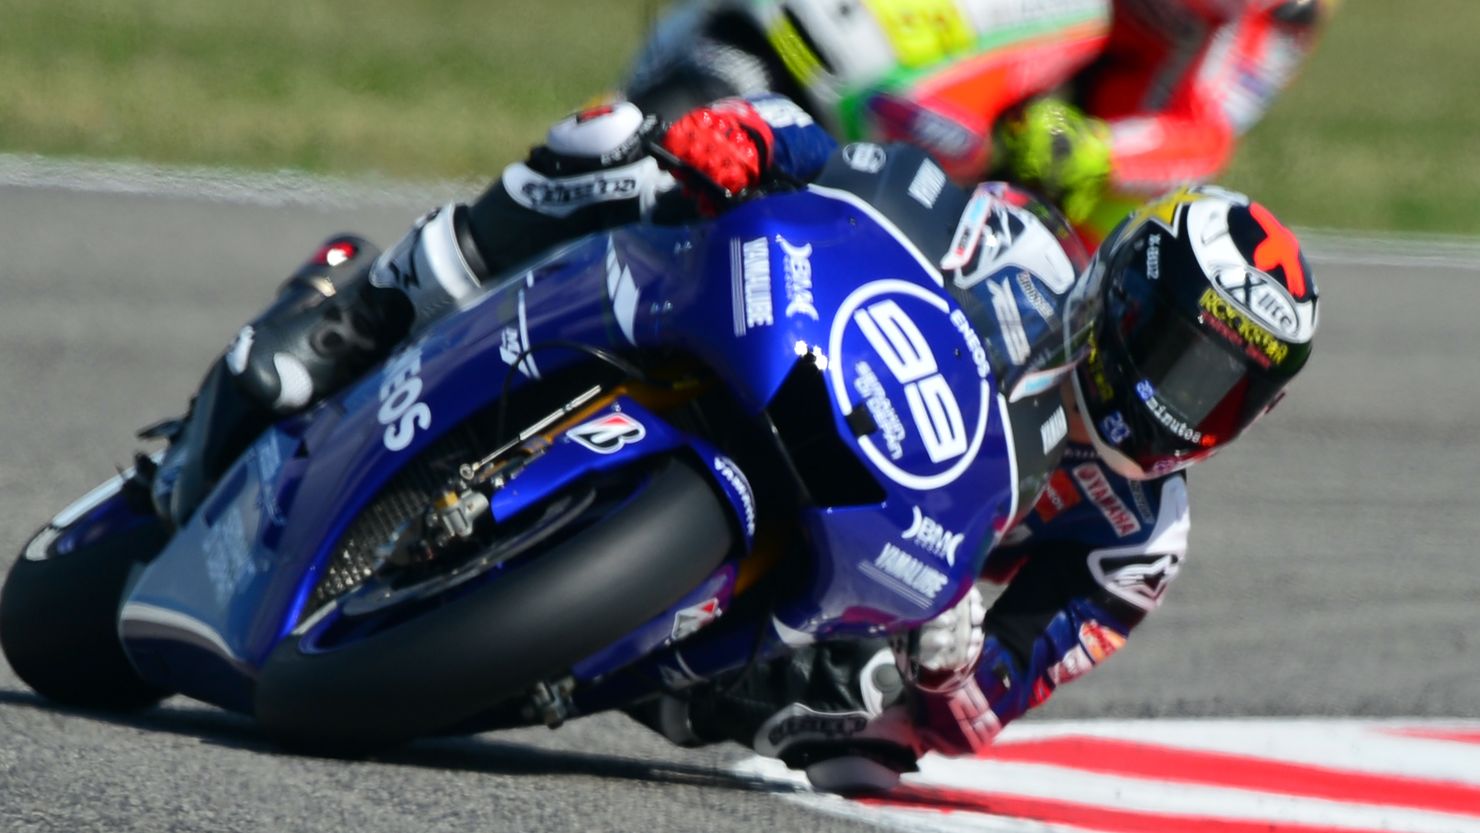 Jorge Lorenzo won the MotoGP world championship for the first and only time in 2010.